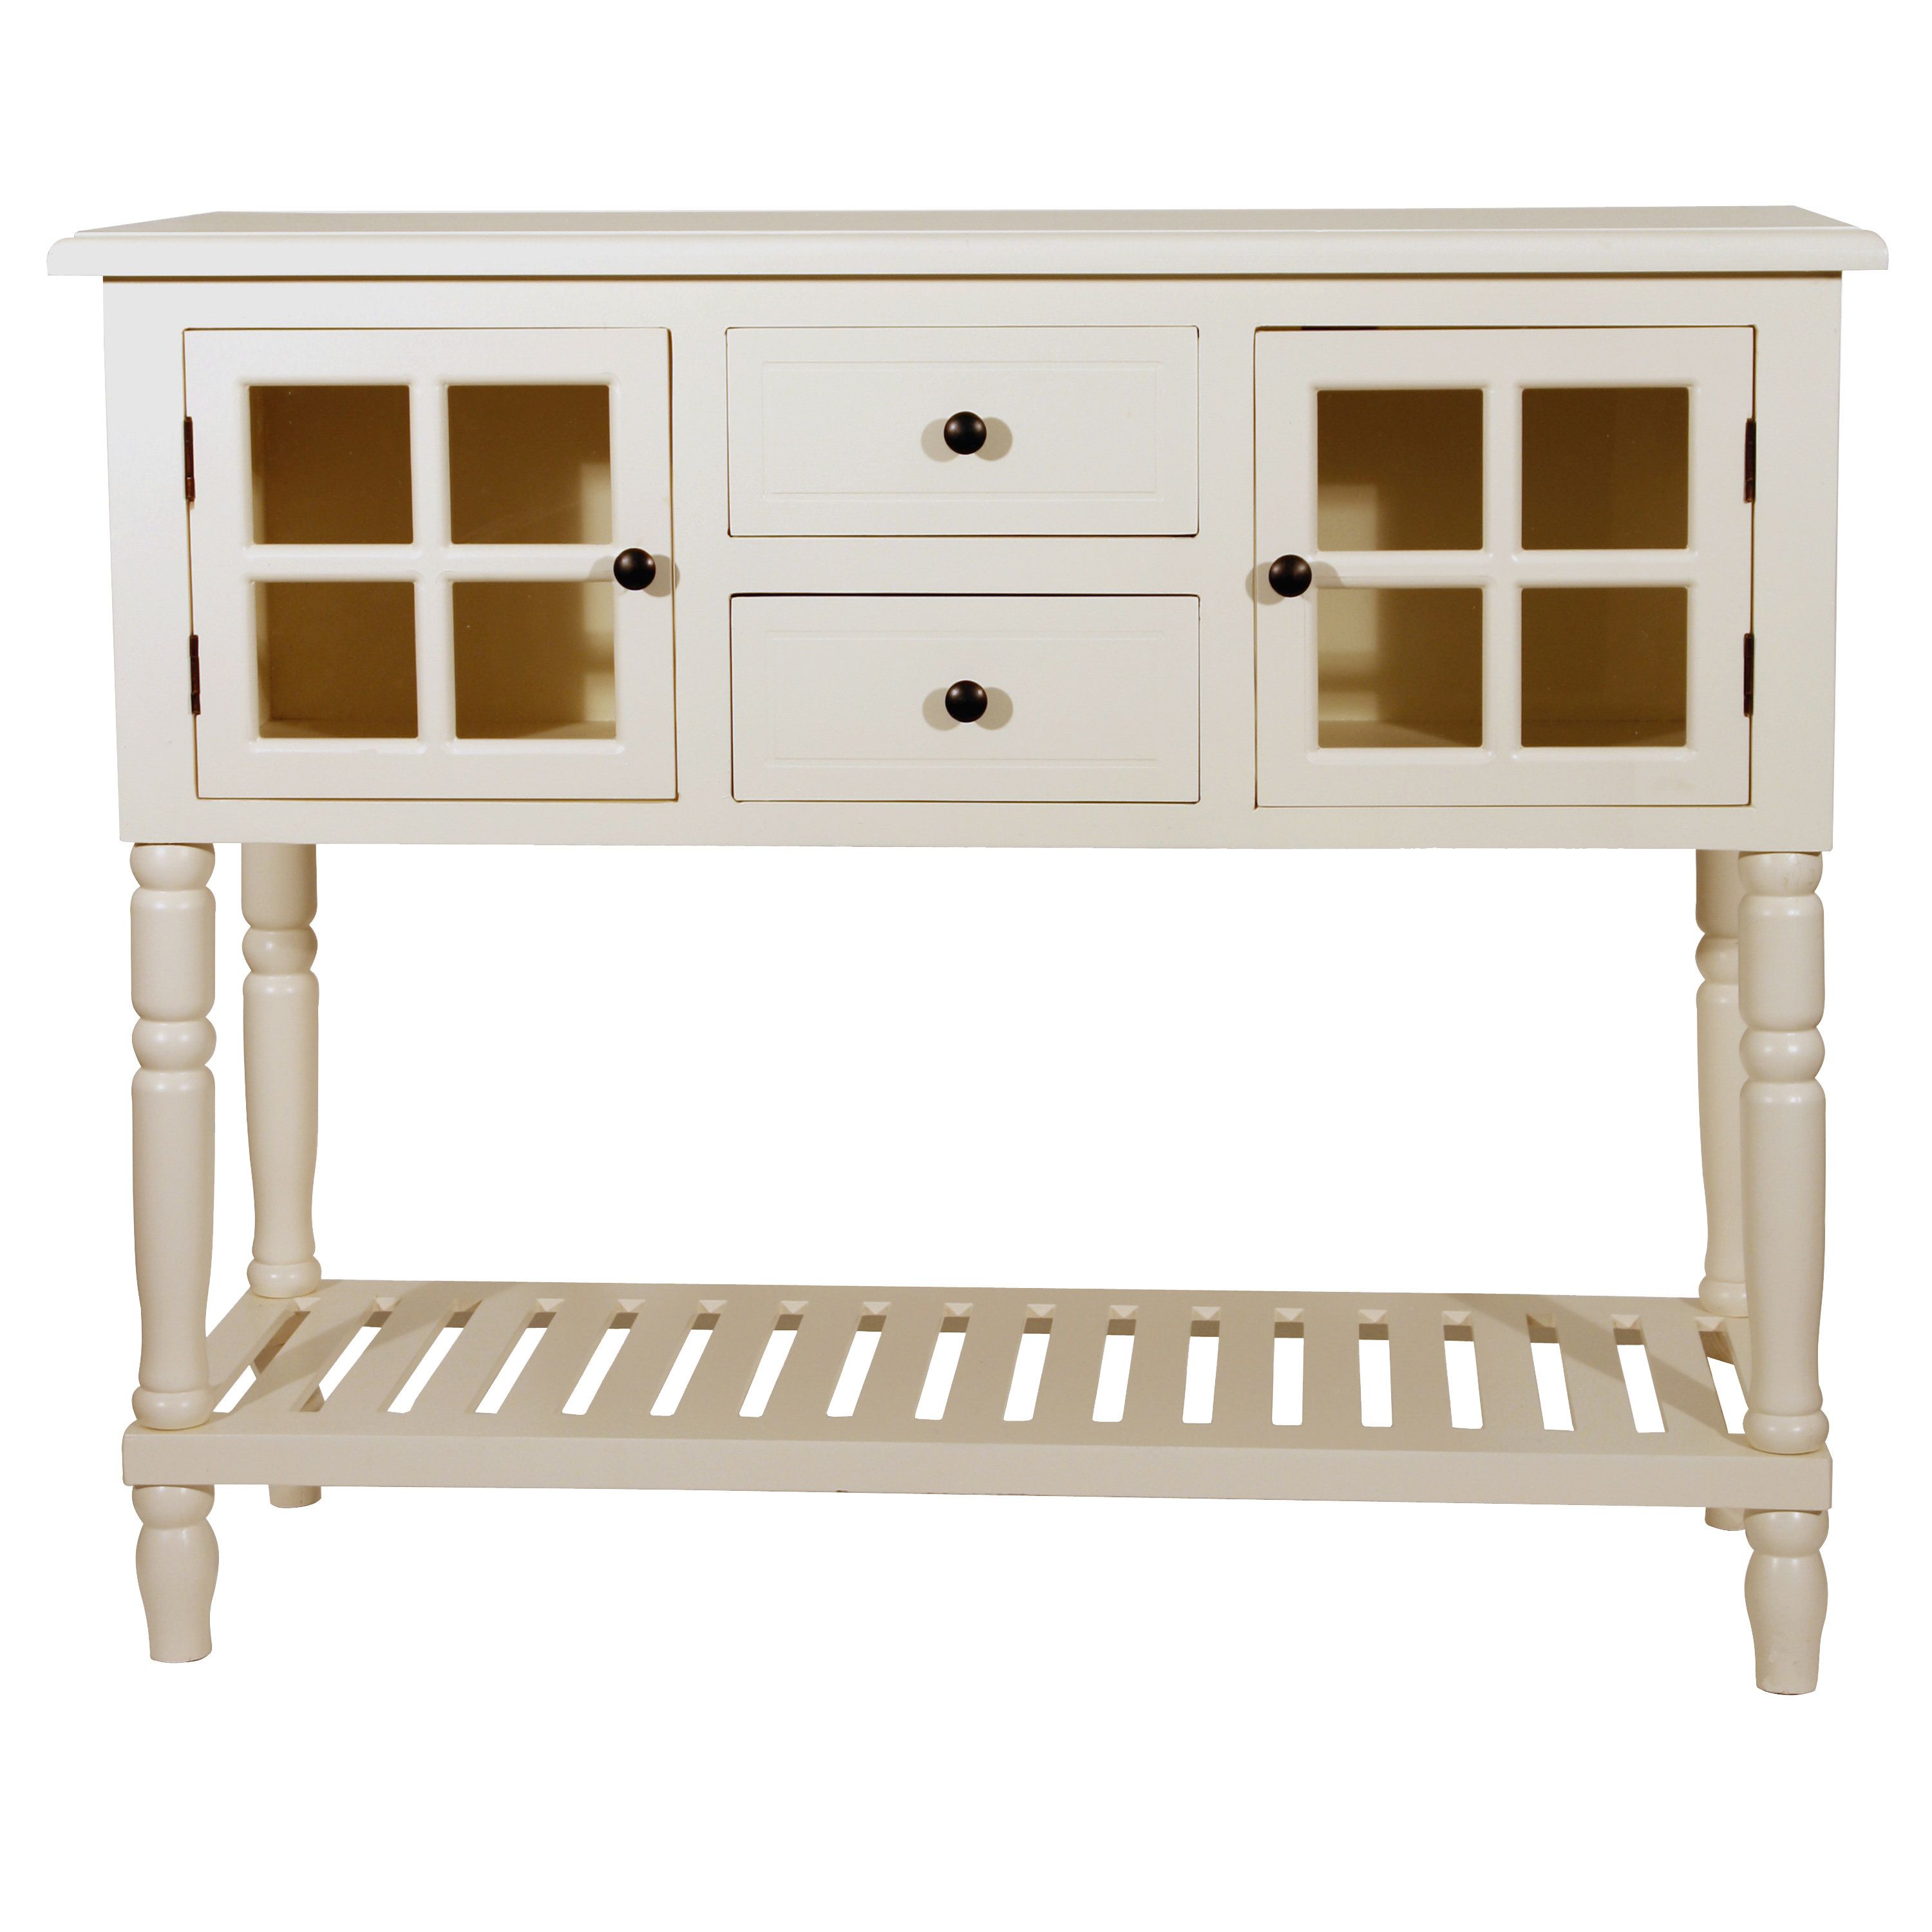 Antique White Console Table | Wayfair In Antique White Distressed Console Tables (Gallery 9 of 20)